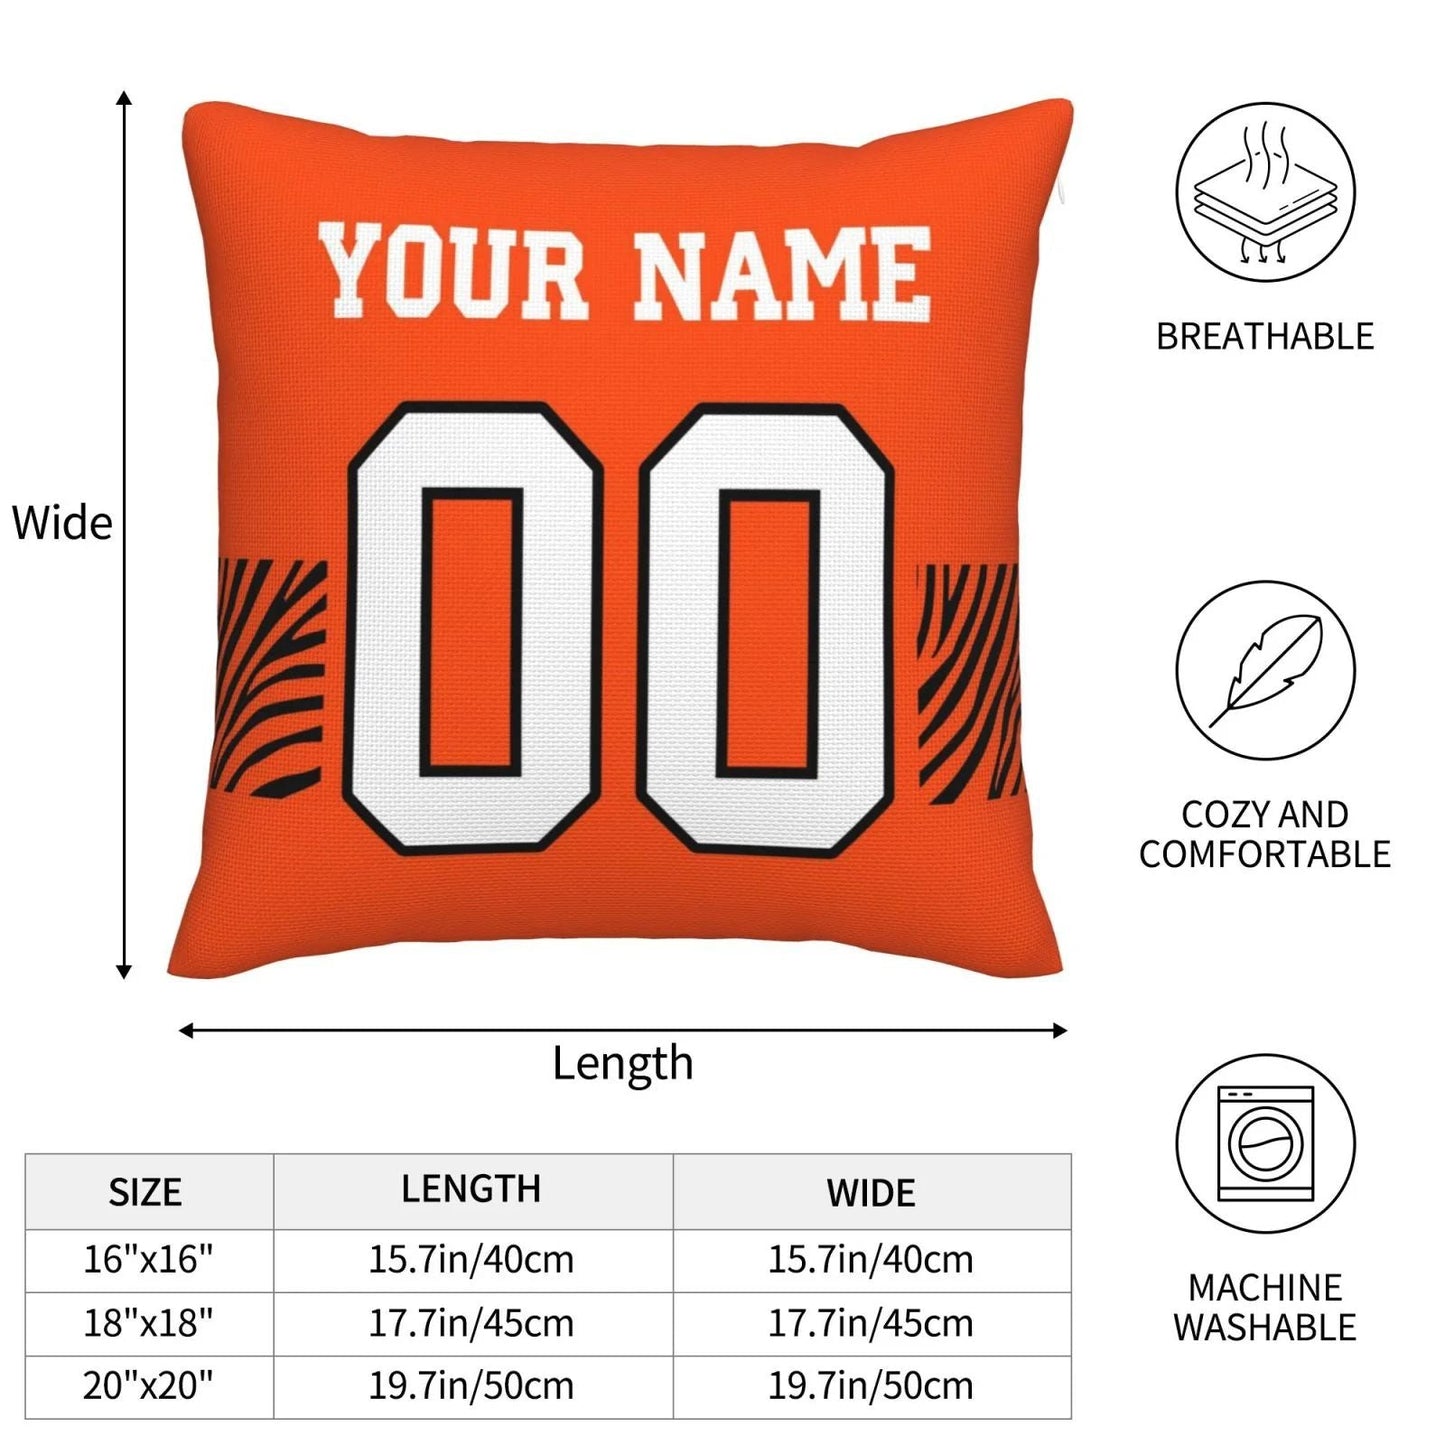 Custom C.Bengals Pillow Decorative Throw Pillow Case - Print Personalized Football Team Fans Name & Number Birthday Gift Football Pillows